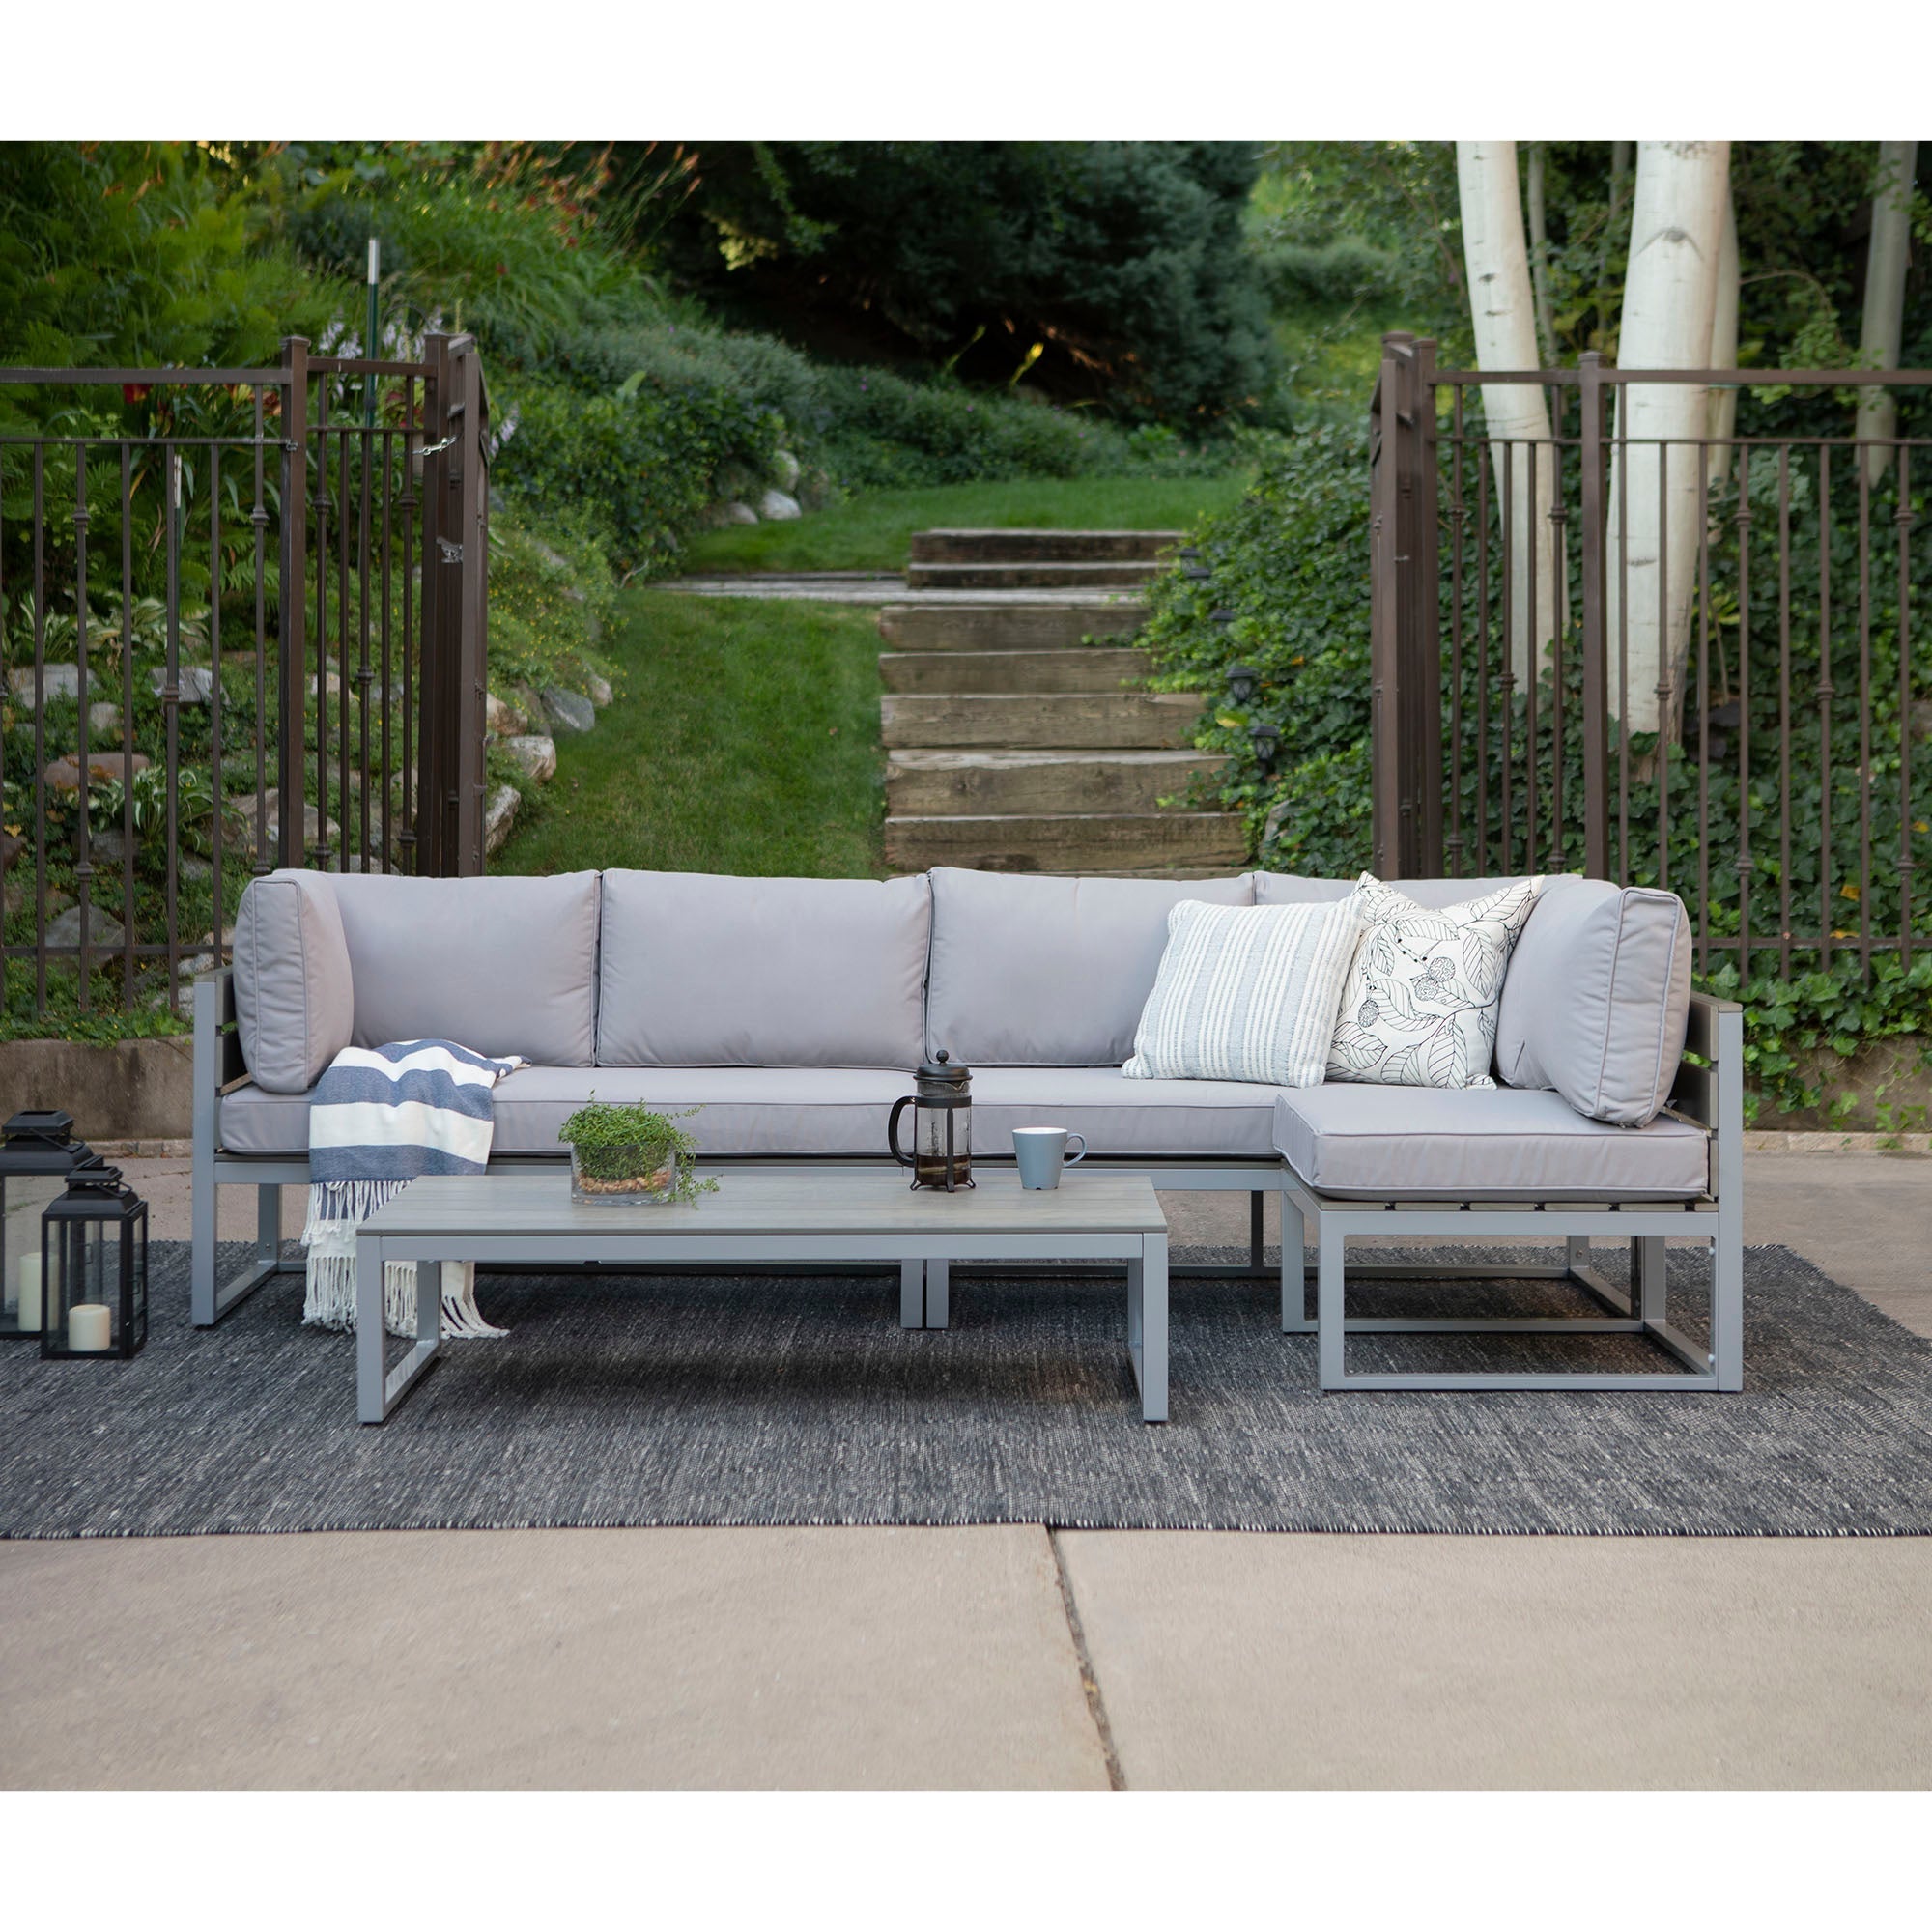 4-Piece Jane Outdoor Patio Conversation Set with Cushions